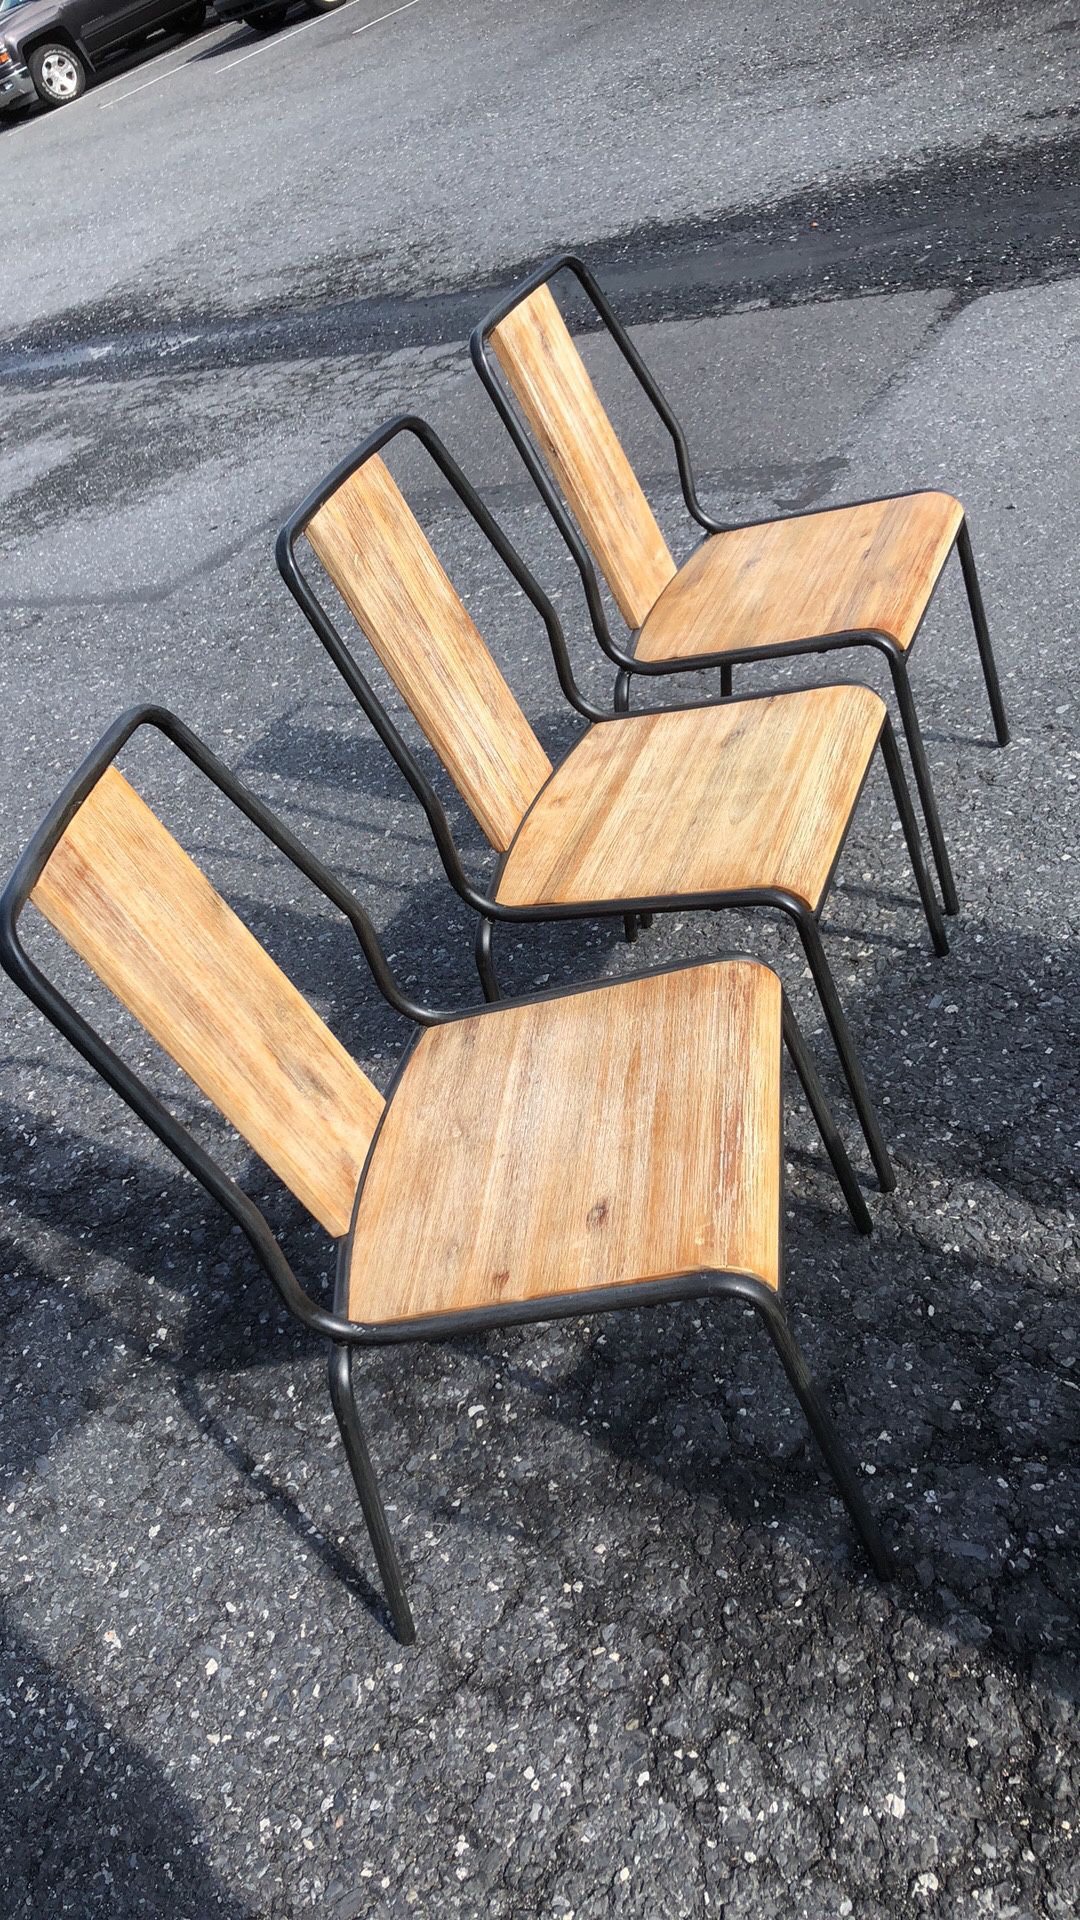 3 Metal and wood strong chairs good condition